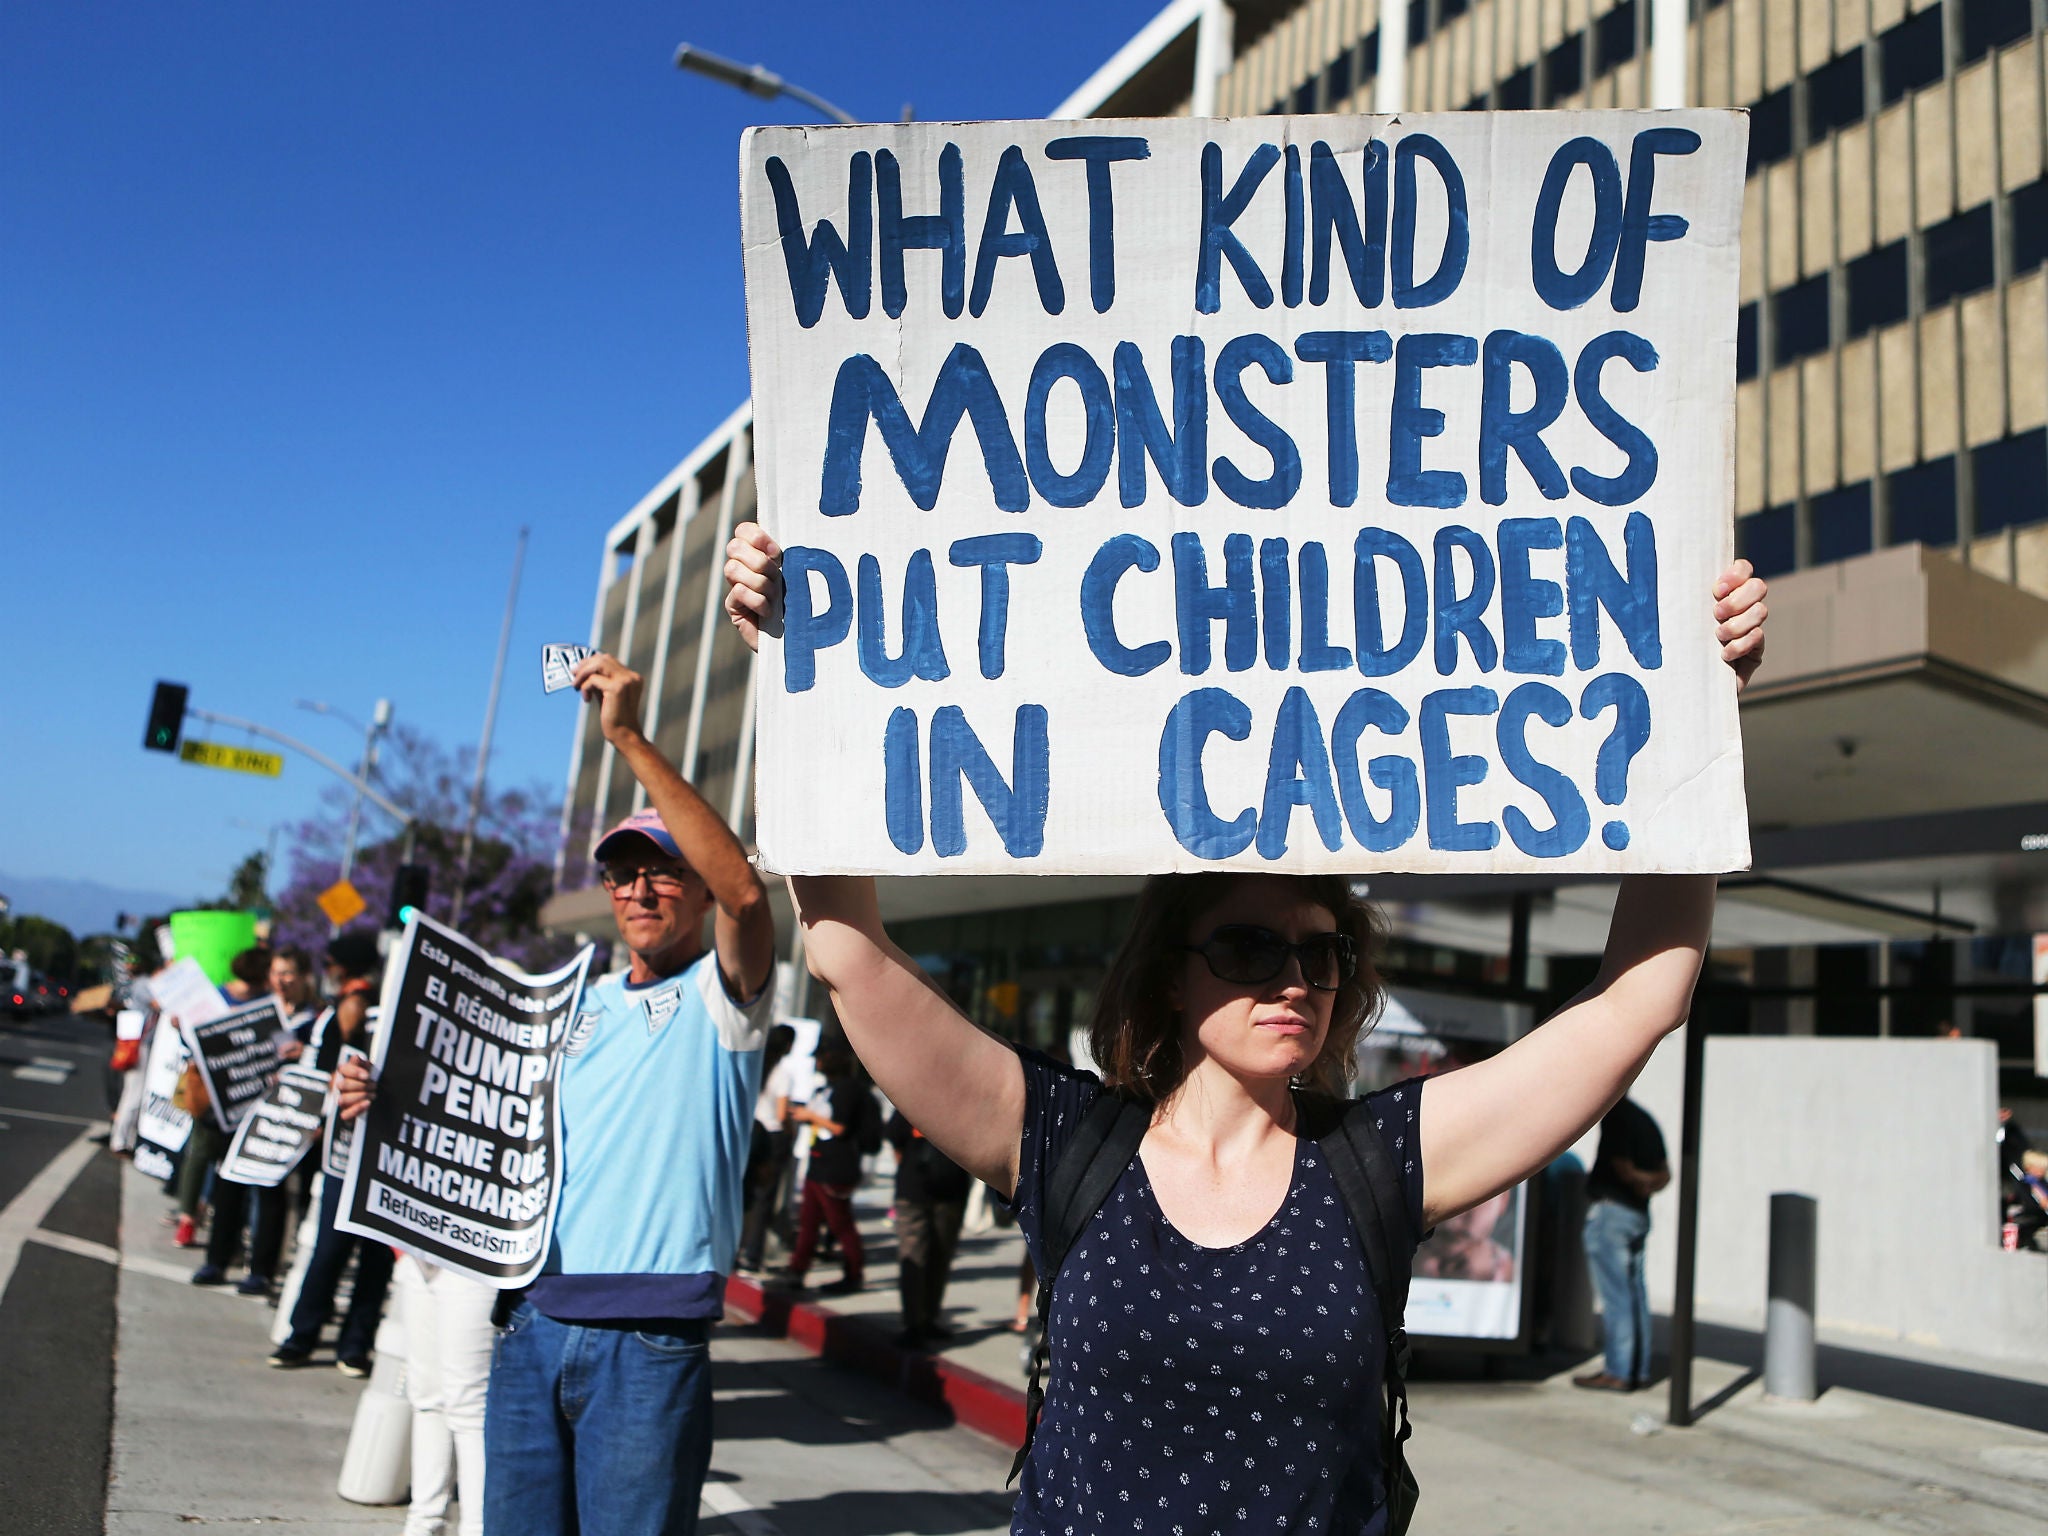 Protestors demonstrate against the separation of migrant children from their families in front of the Federal Building in Los Angeles, California